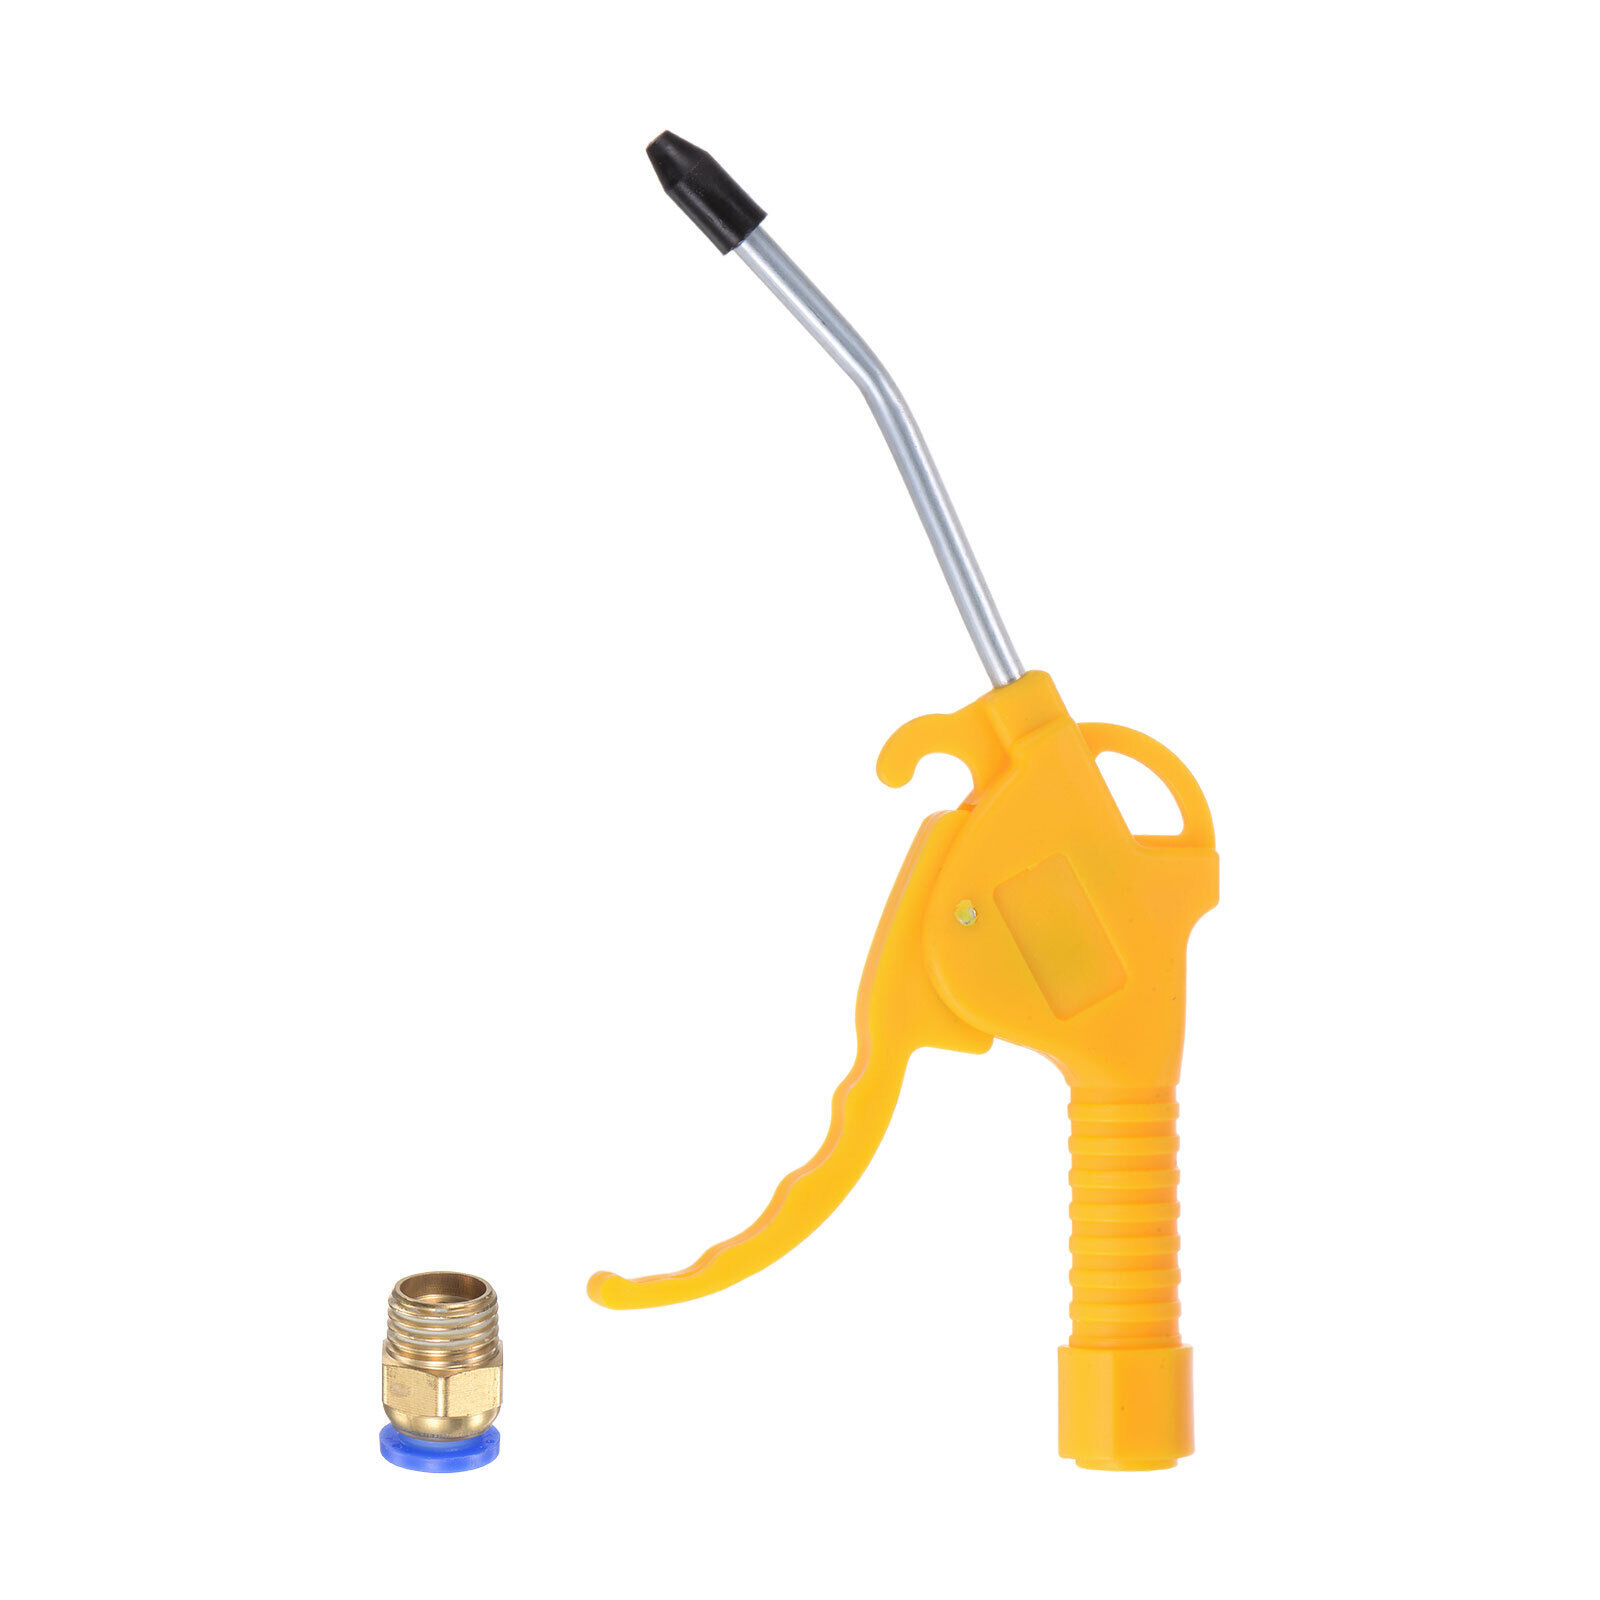 High Pressure Air Blow Gun Stainless Steel With 3.94" Long Angled Nozzle,yellow